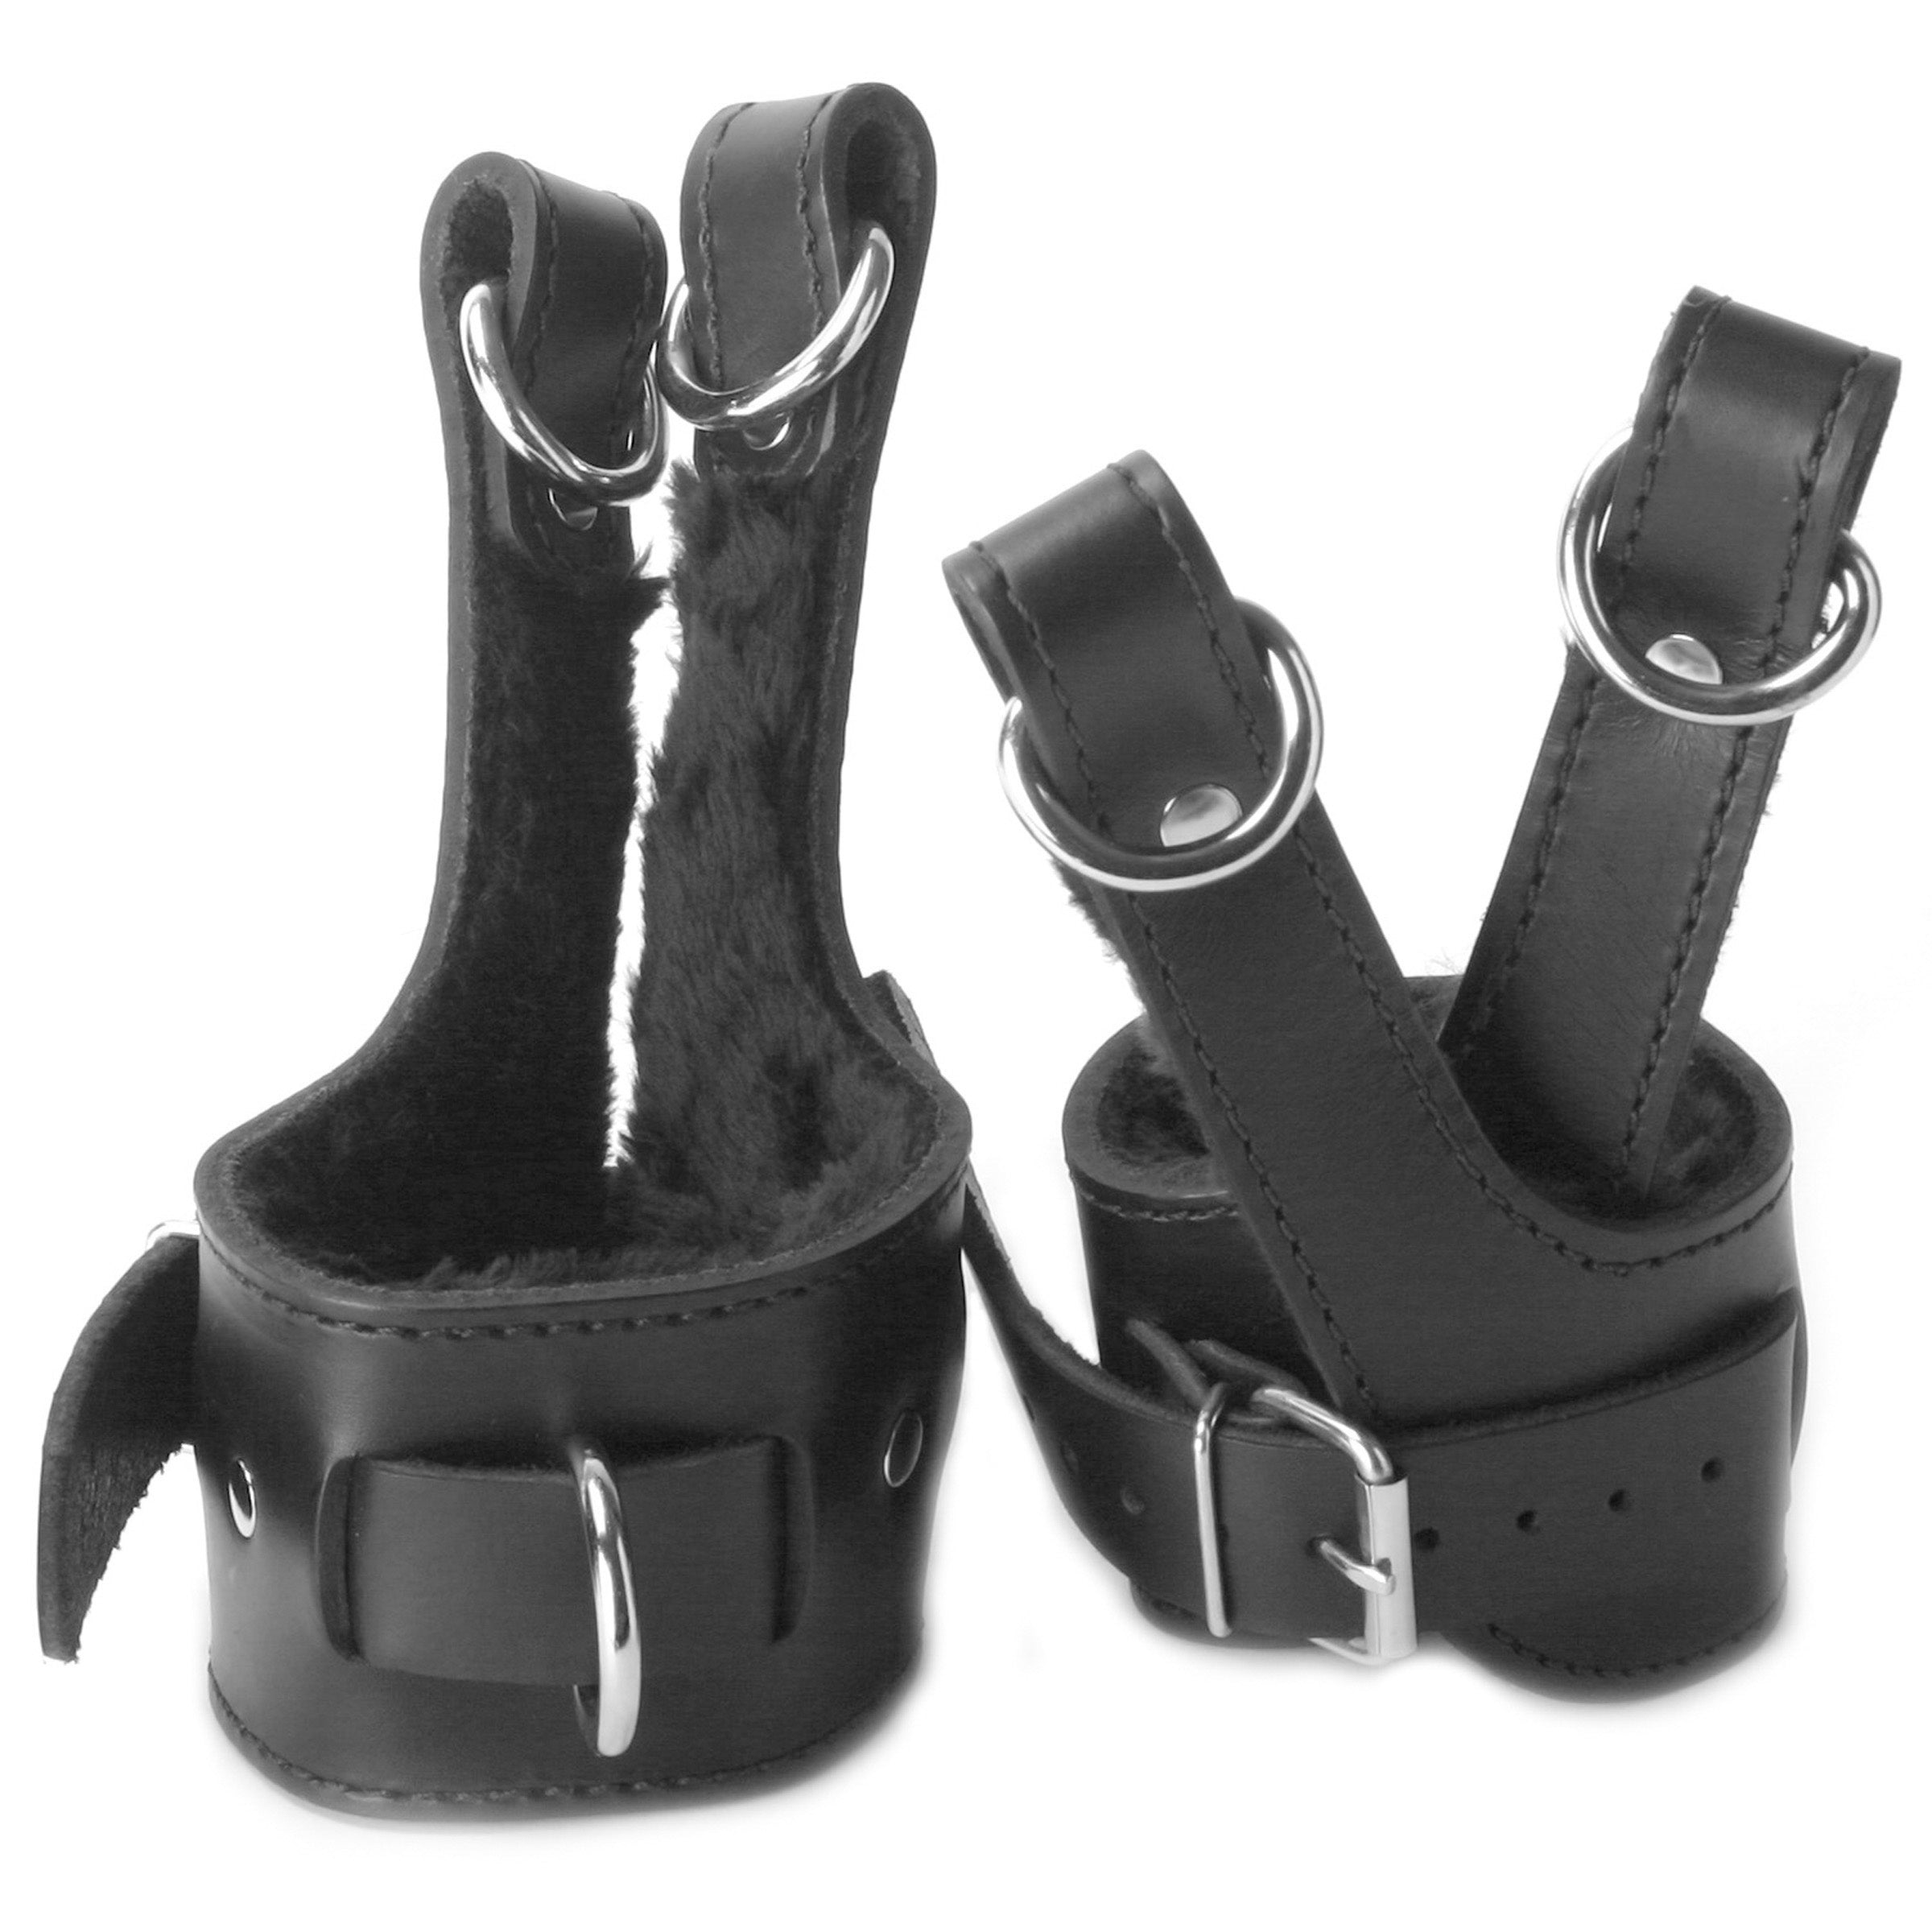 Fur Lined Leather Suspension Cuff Kit with Bondage Ring